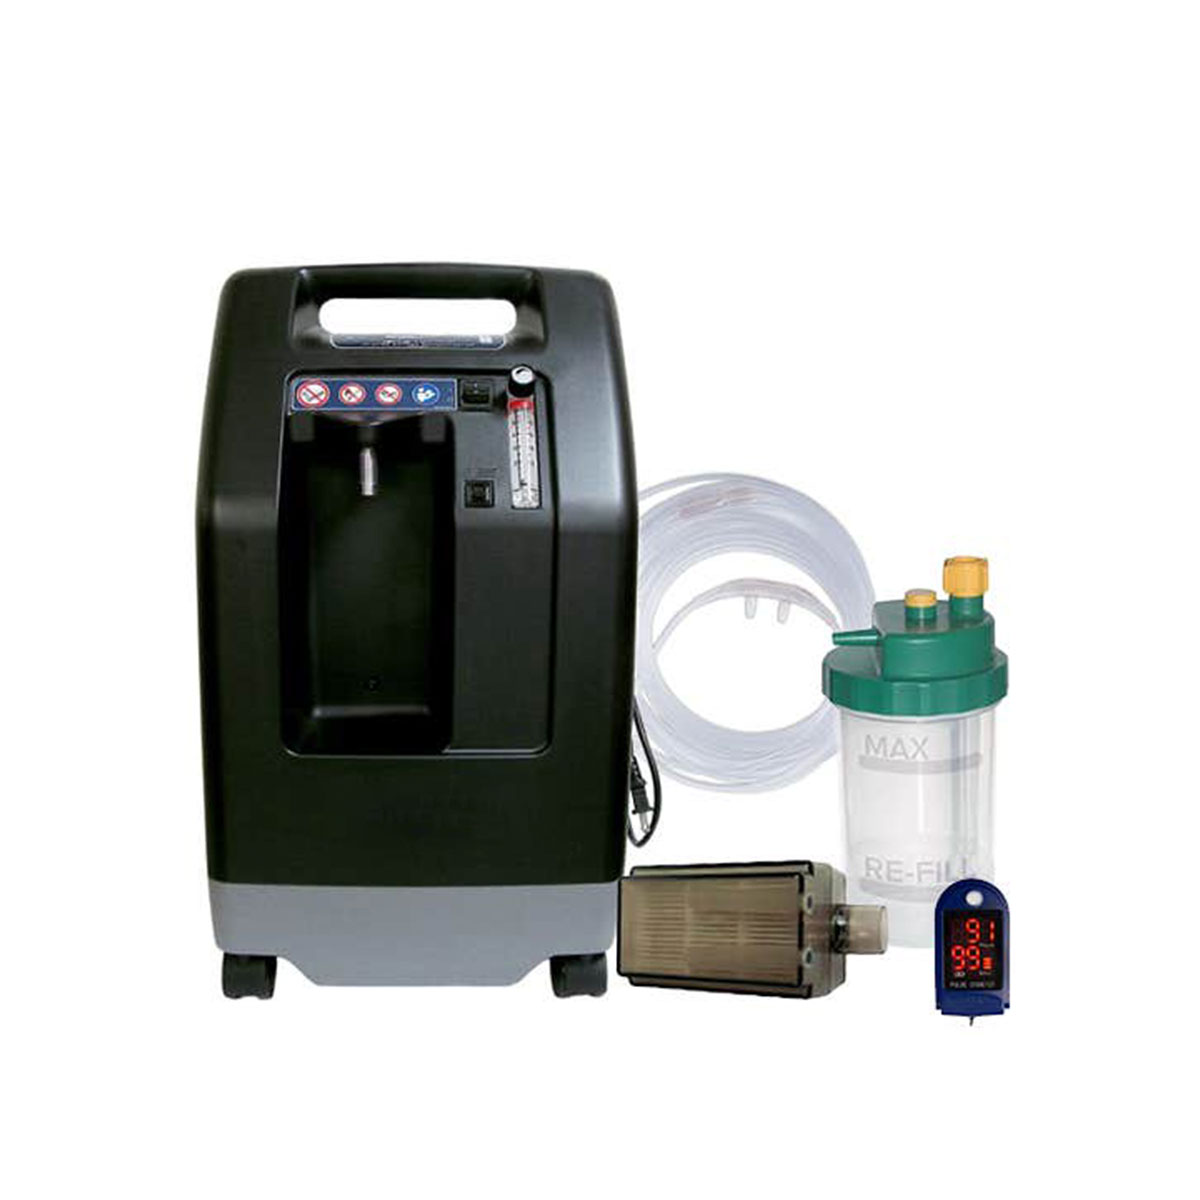 Devilbiss Oxygen Concentrator 5 LPM On Sale Suppliers, Service Provider in Dilli haat